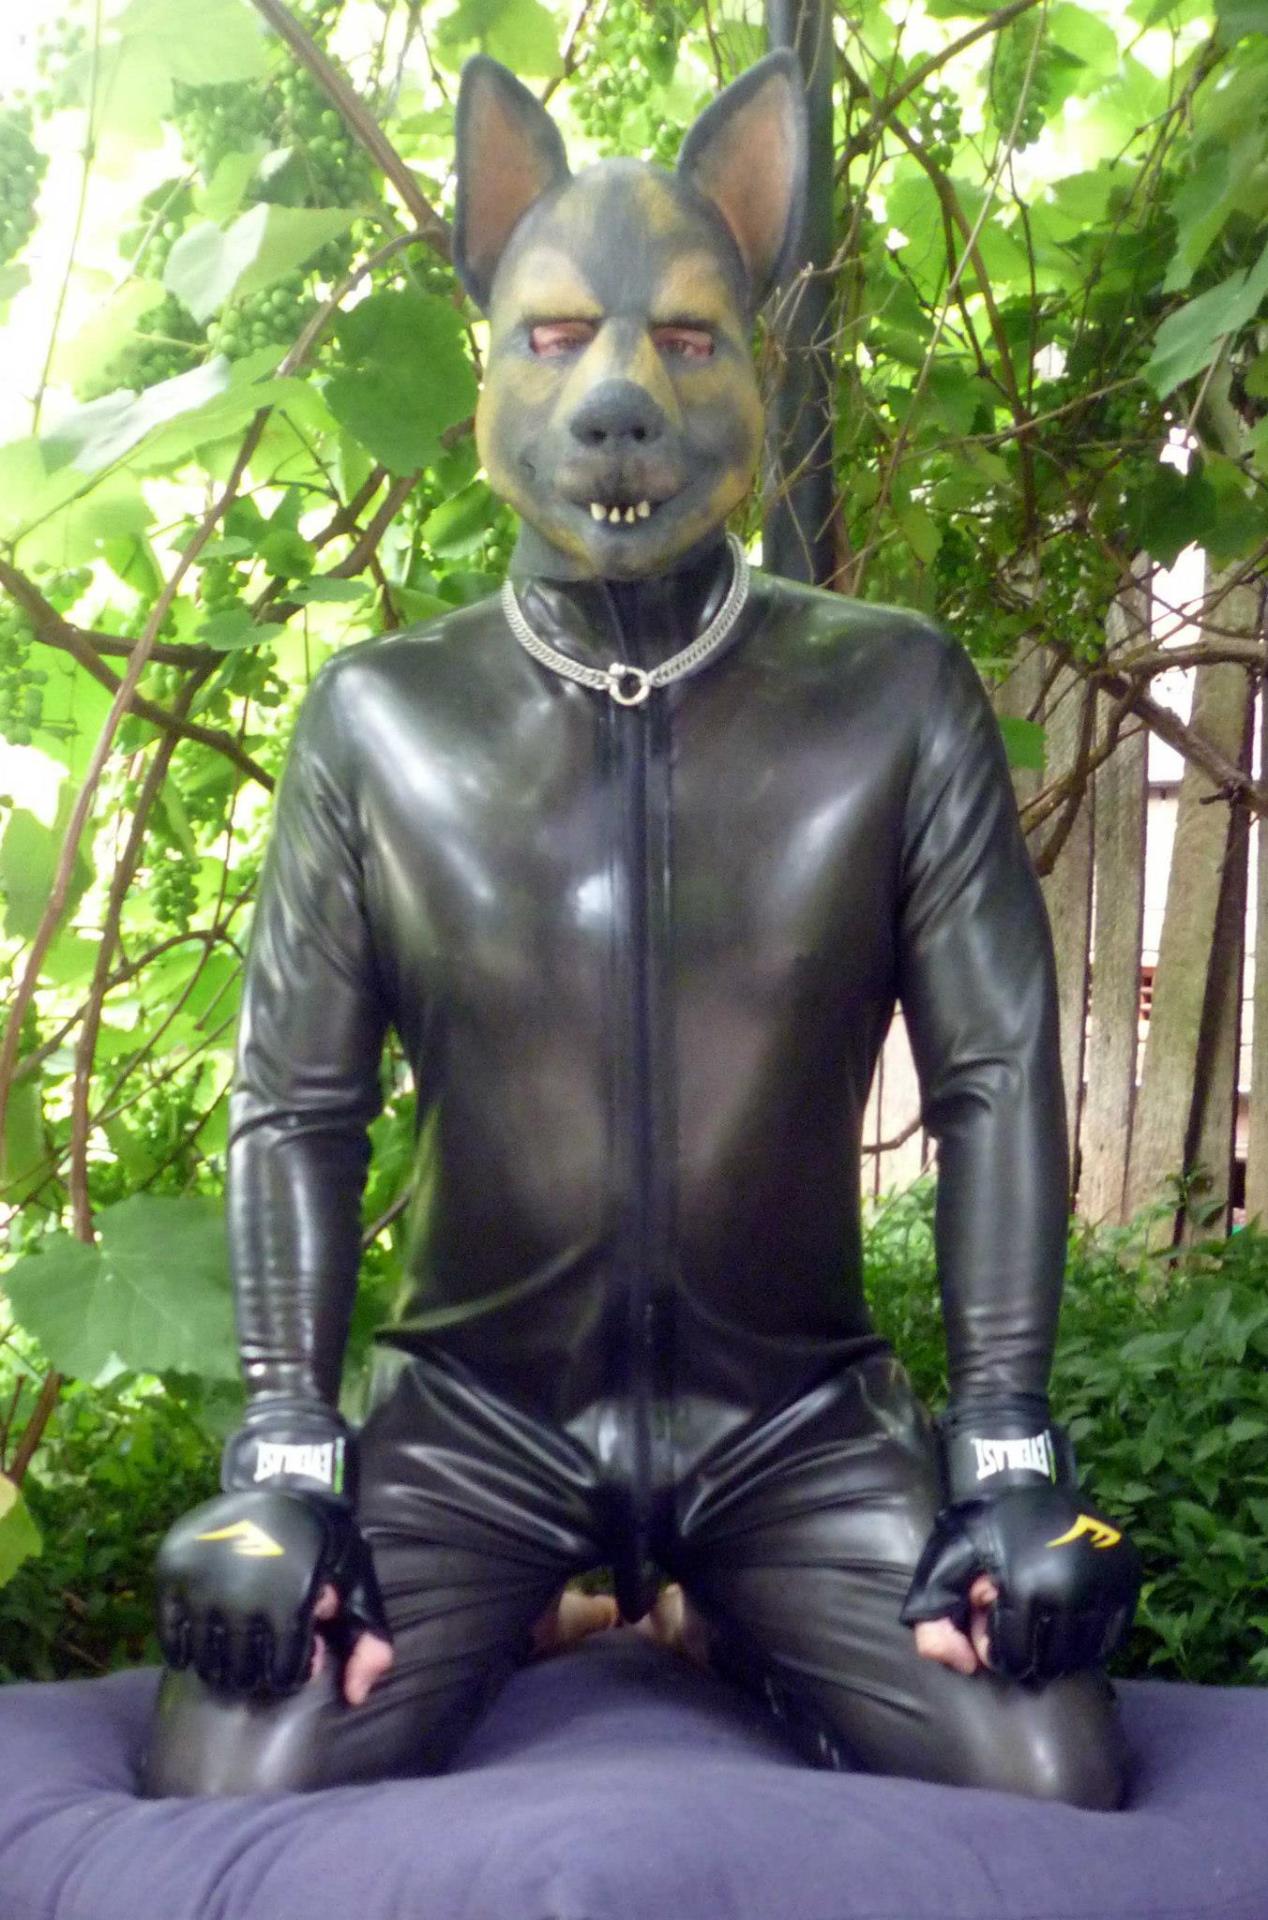 Gpup chilling in the back yard of the Sirius Pup compound wearing his rubber catsuit.